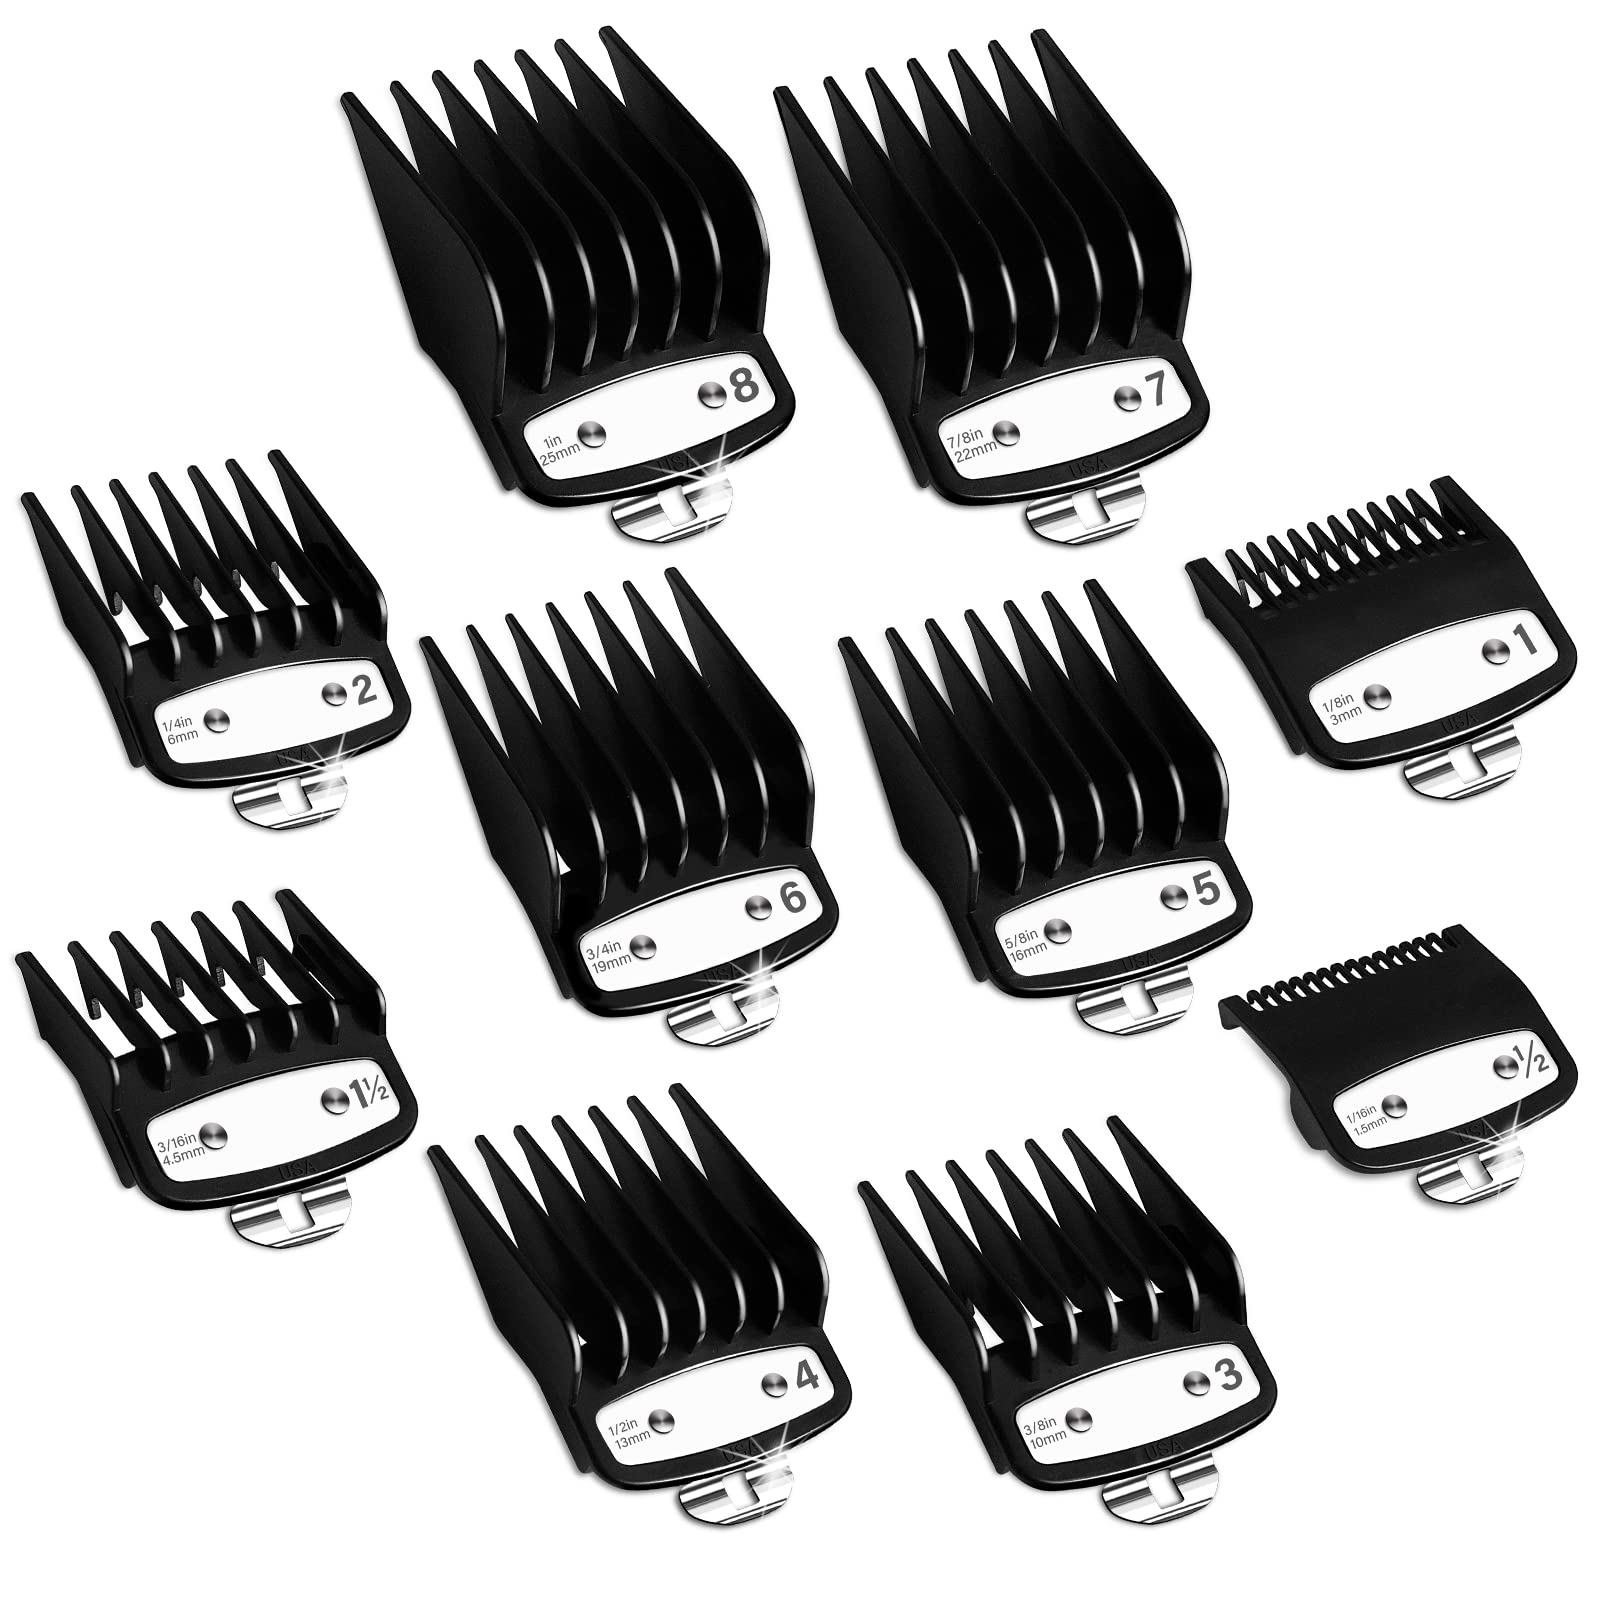 Professional Hair Clipper Guards Guides 10 Pcs Coded Cutting Guides #3170-400- 1/8” to 1 fits for All Wahl Clippers(Black-10 pcs)